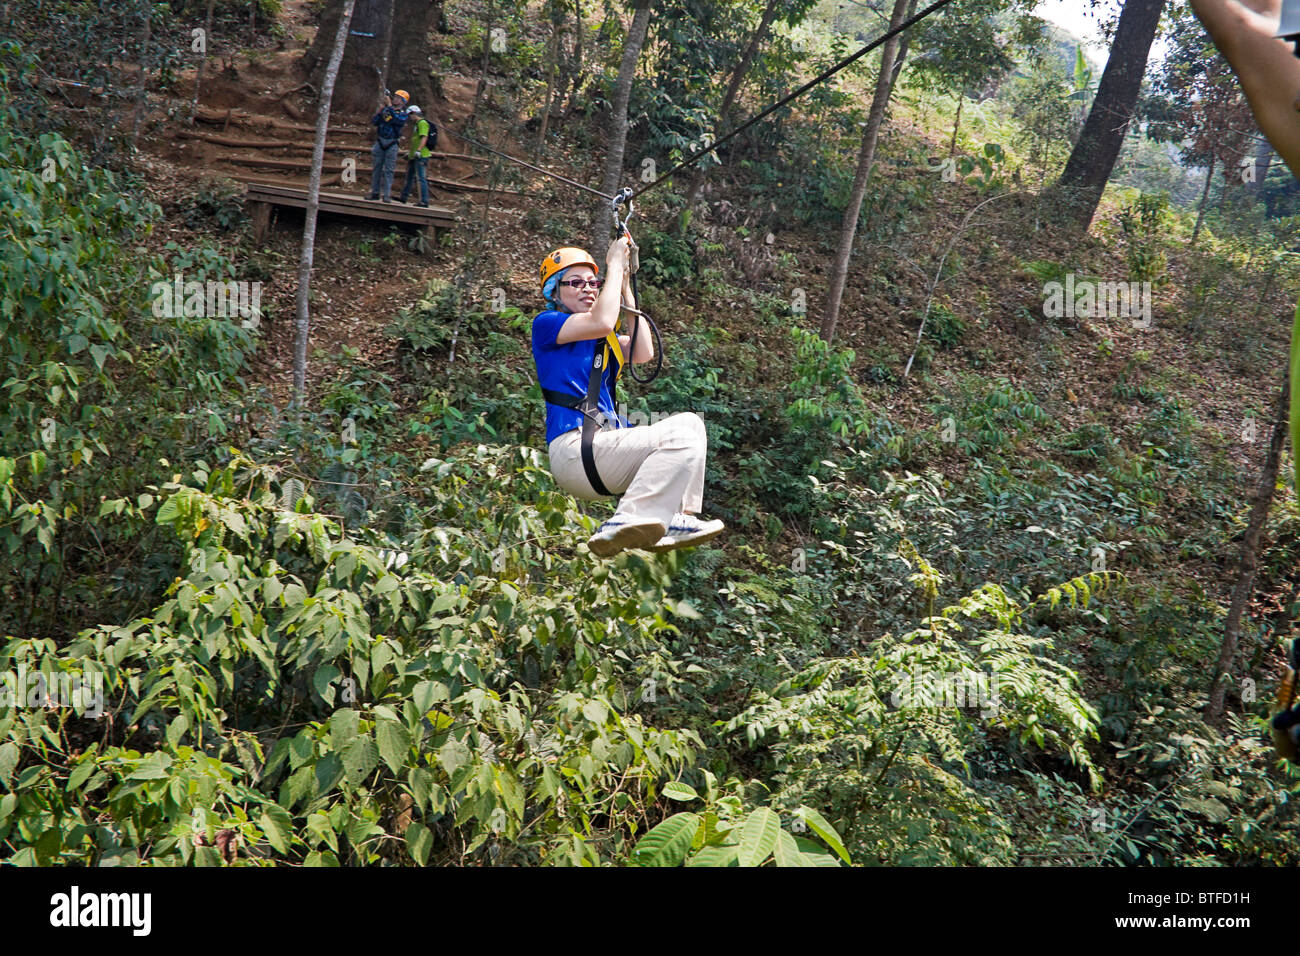 Woman having fun on ziplines at canopy tour in the Chiang Mai area of Thailand. Stock Photo